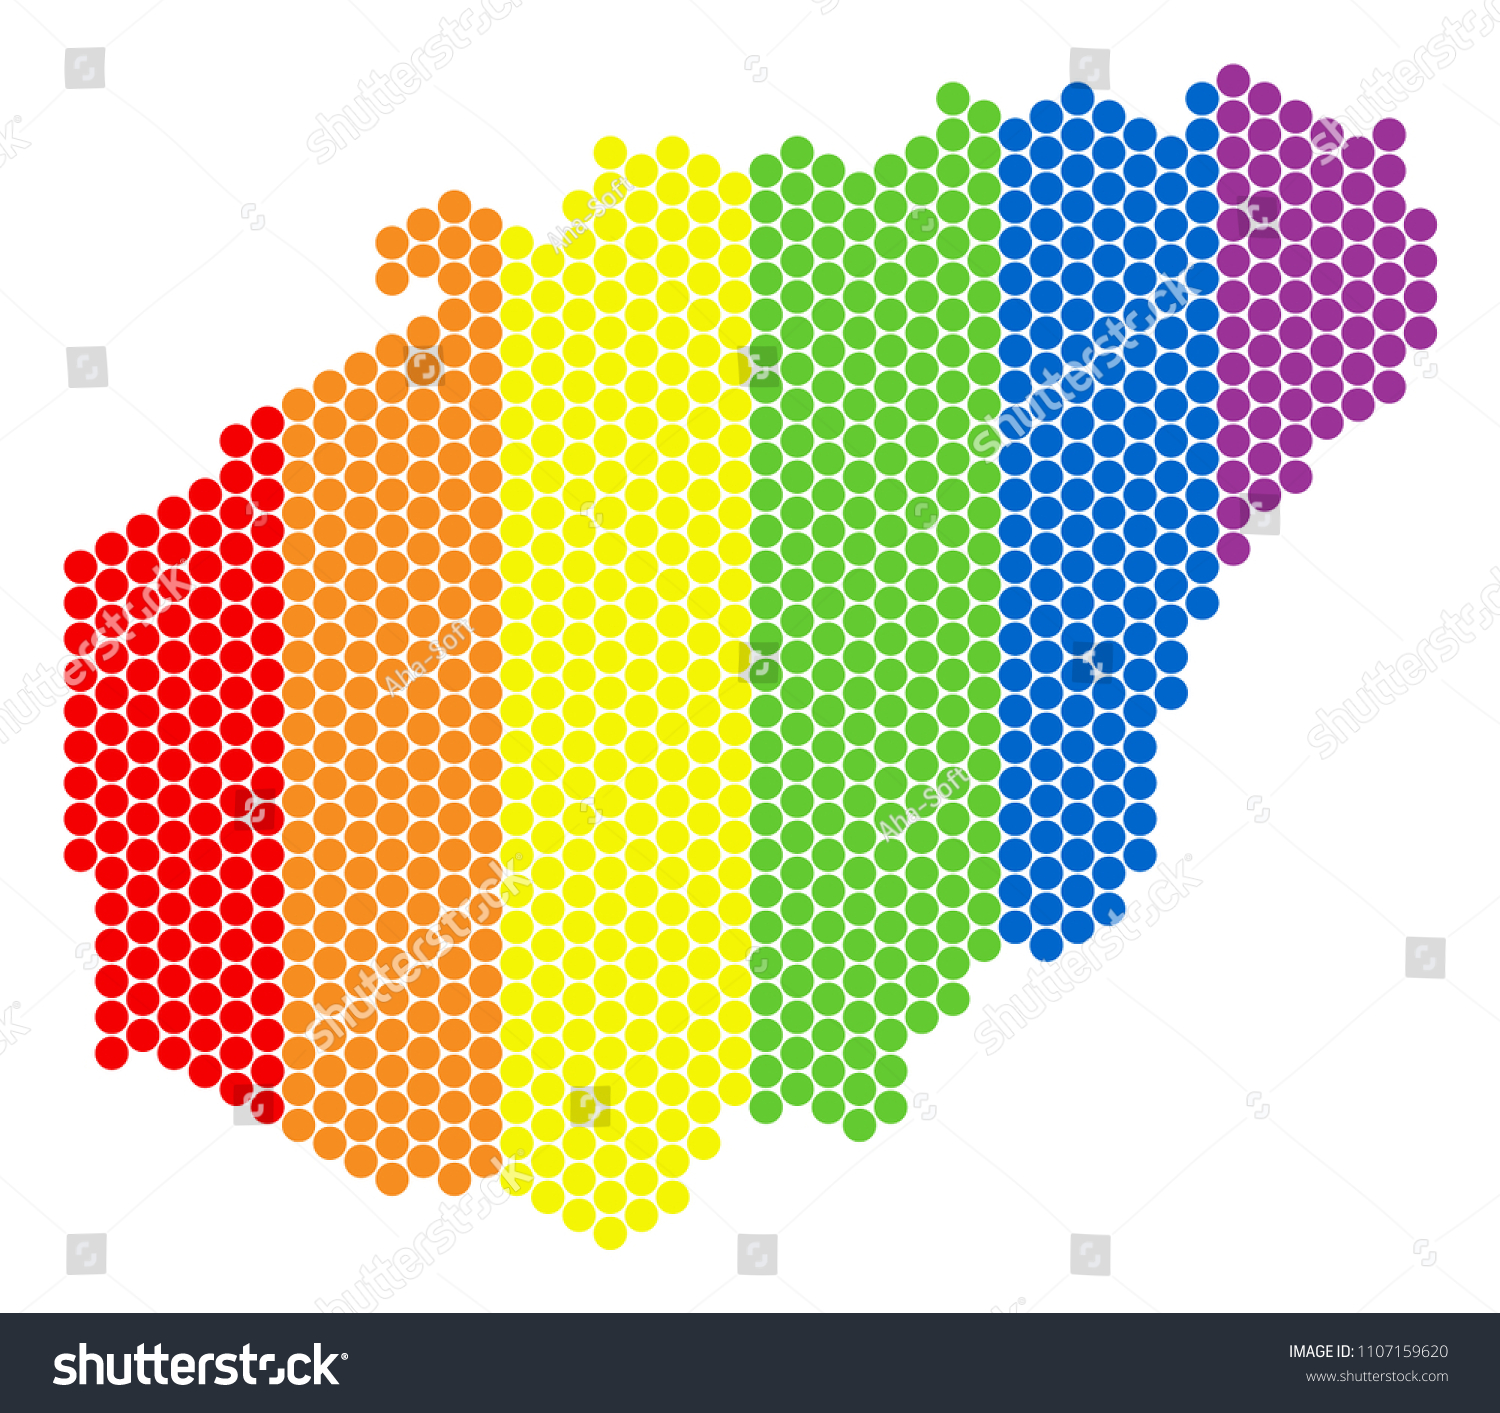 A Dotted Lgbt Hainan Island Map For Lesbians Royalty Free Stock Vector 1107159620 7044